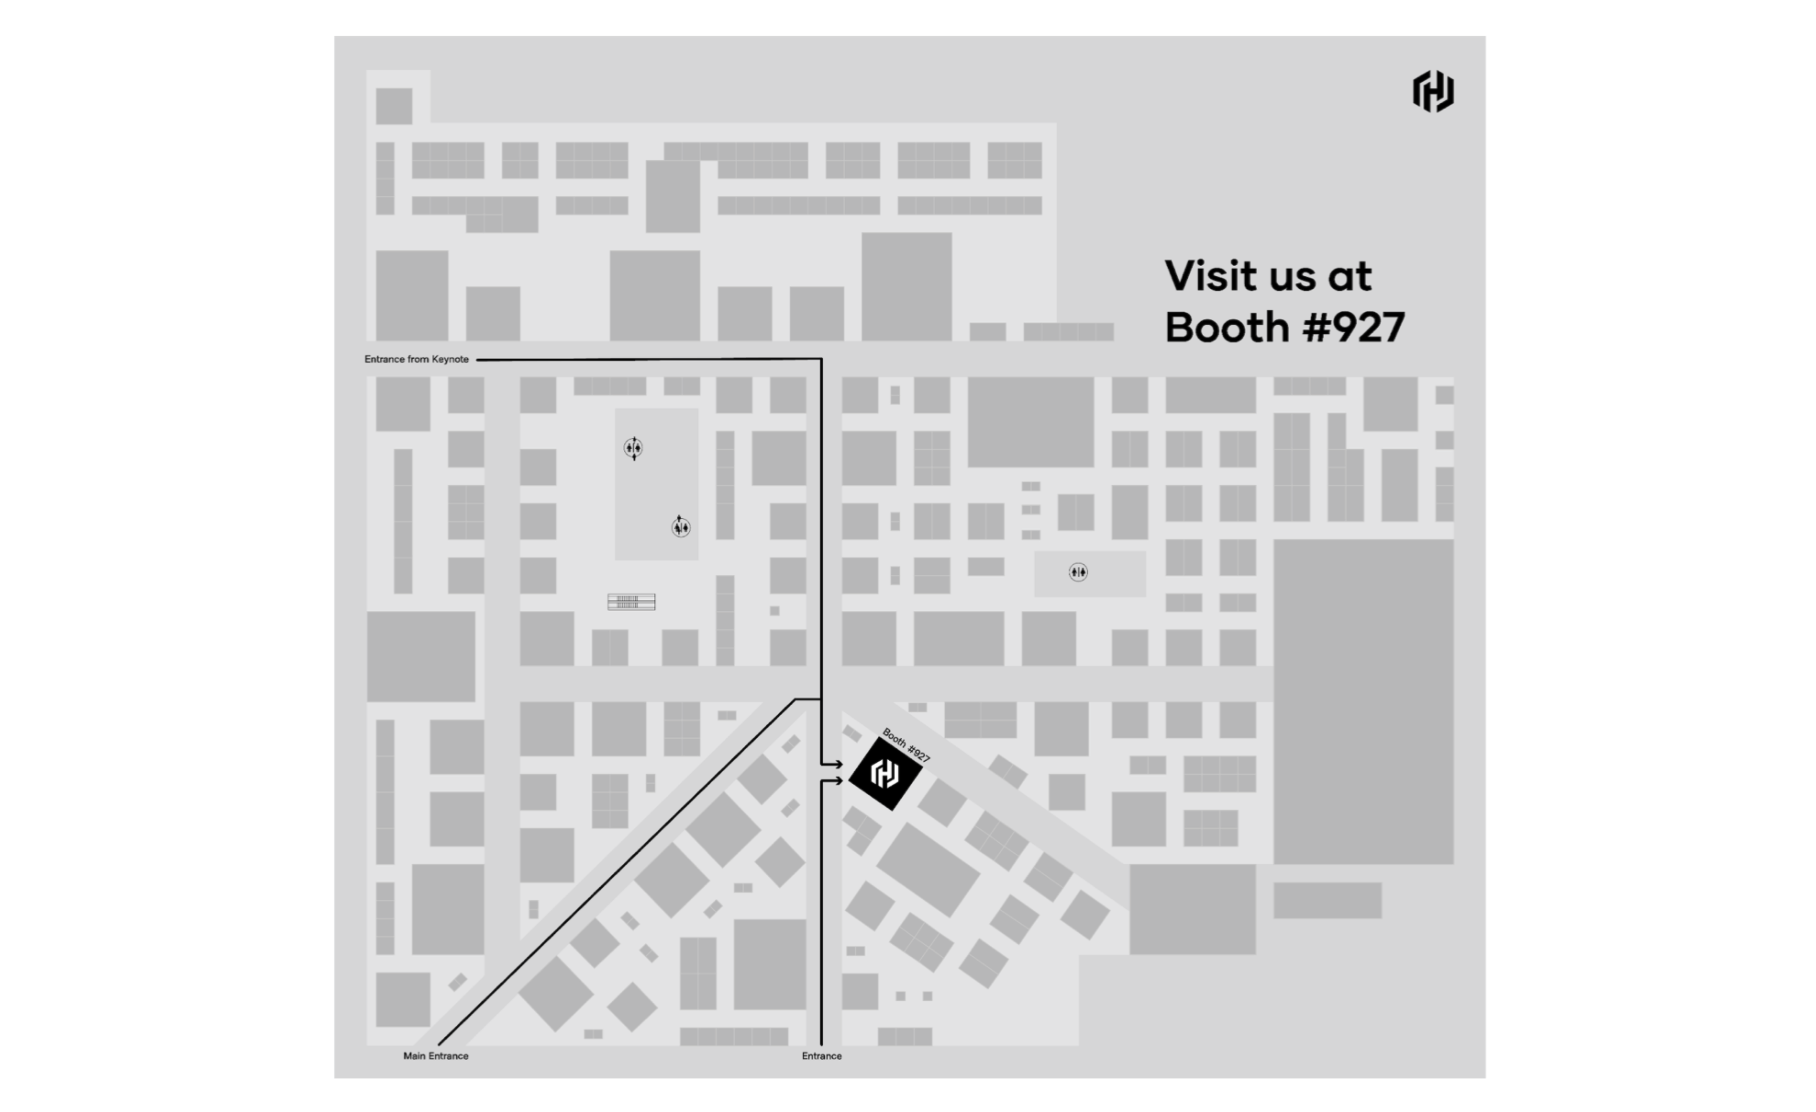 Visit the HashiCorp booth at re:Invent - Booth #927